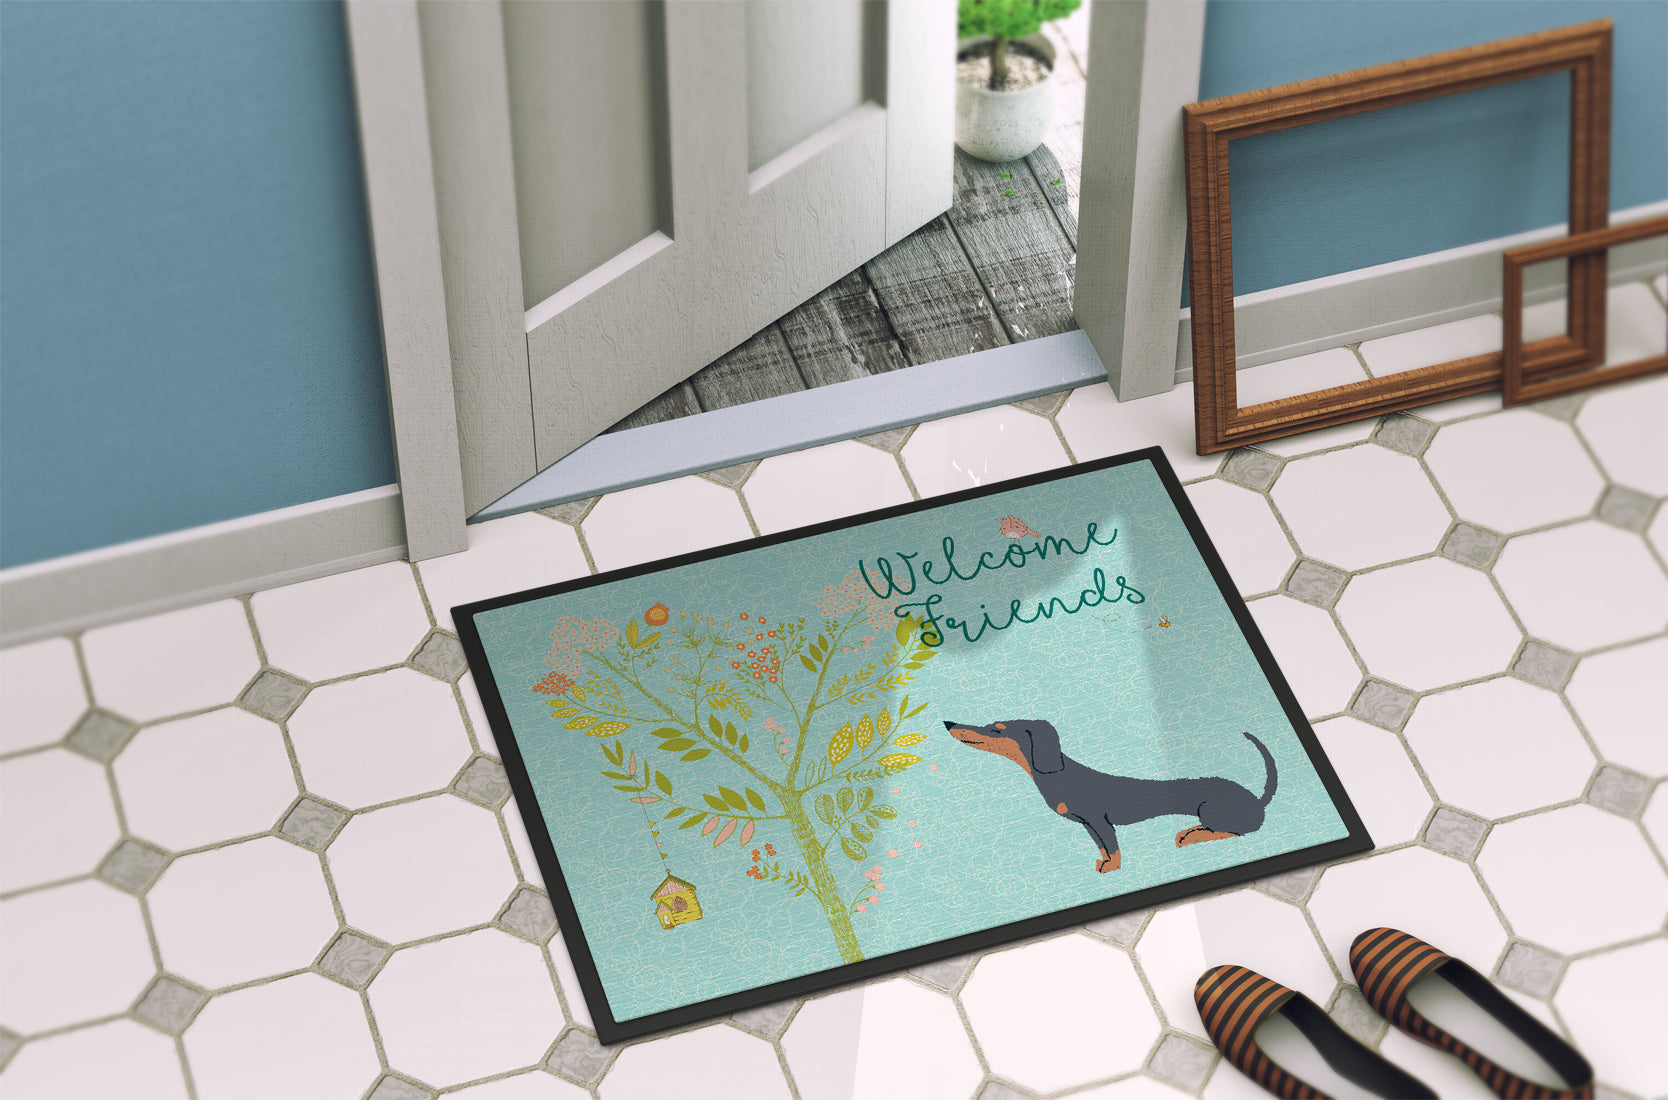 Welcome Friends Black Tan Dachshund Indoor or Outdoor Mat 18x27 BB7630MAT - the-store.com